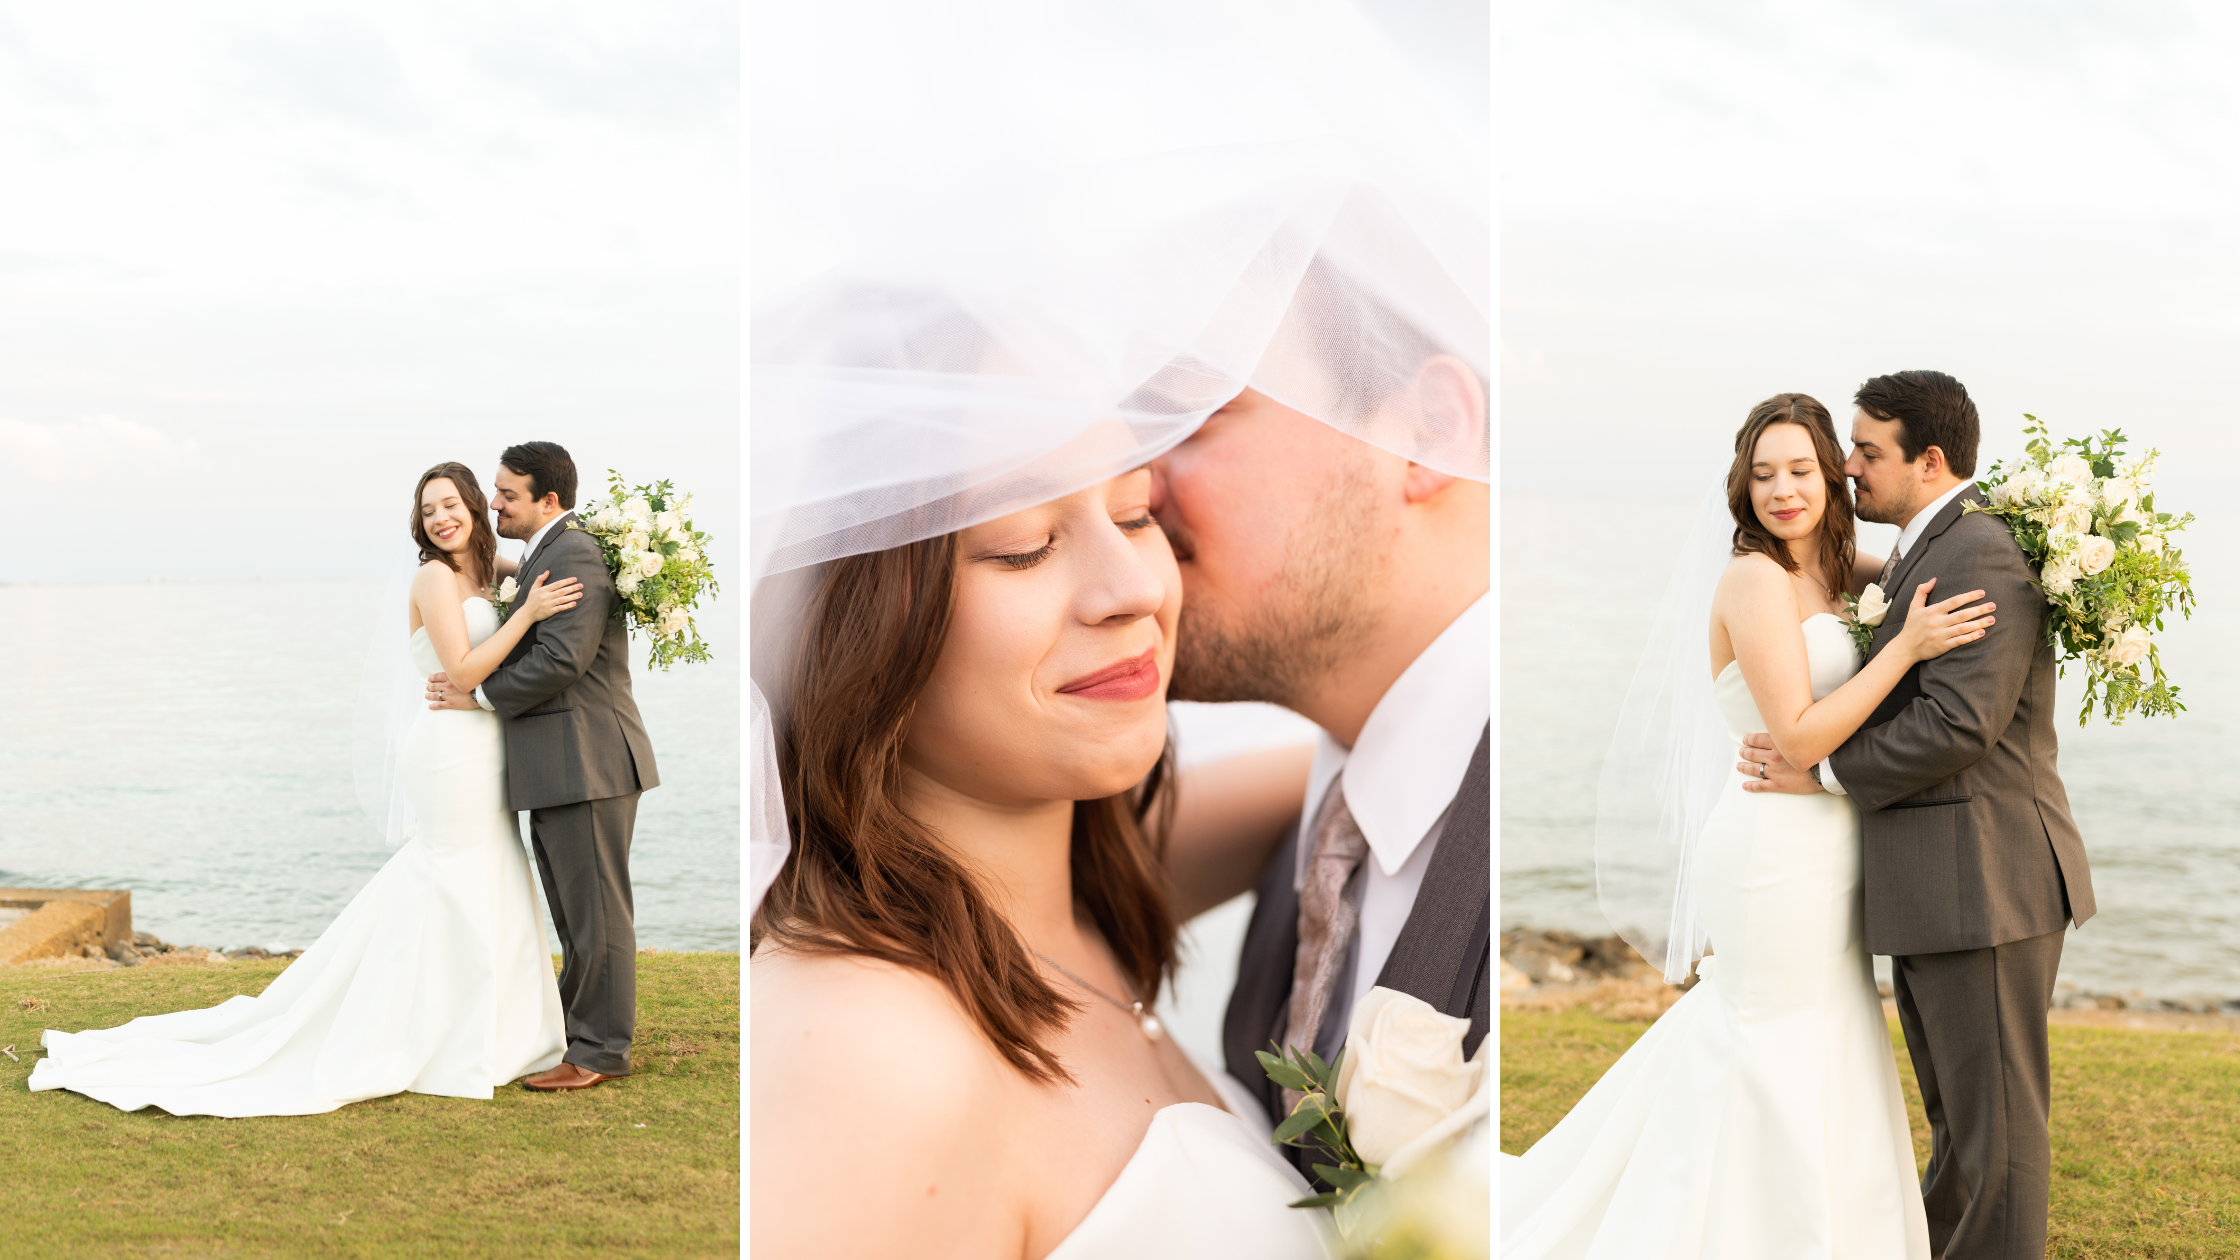 Pensacola Country Club Wedding Photography Photographed by Kristen Marcus Photography